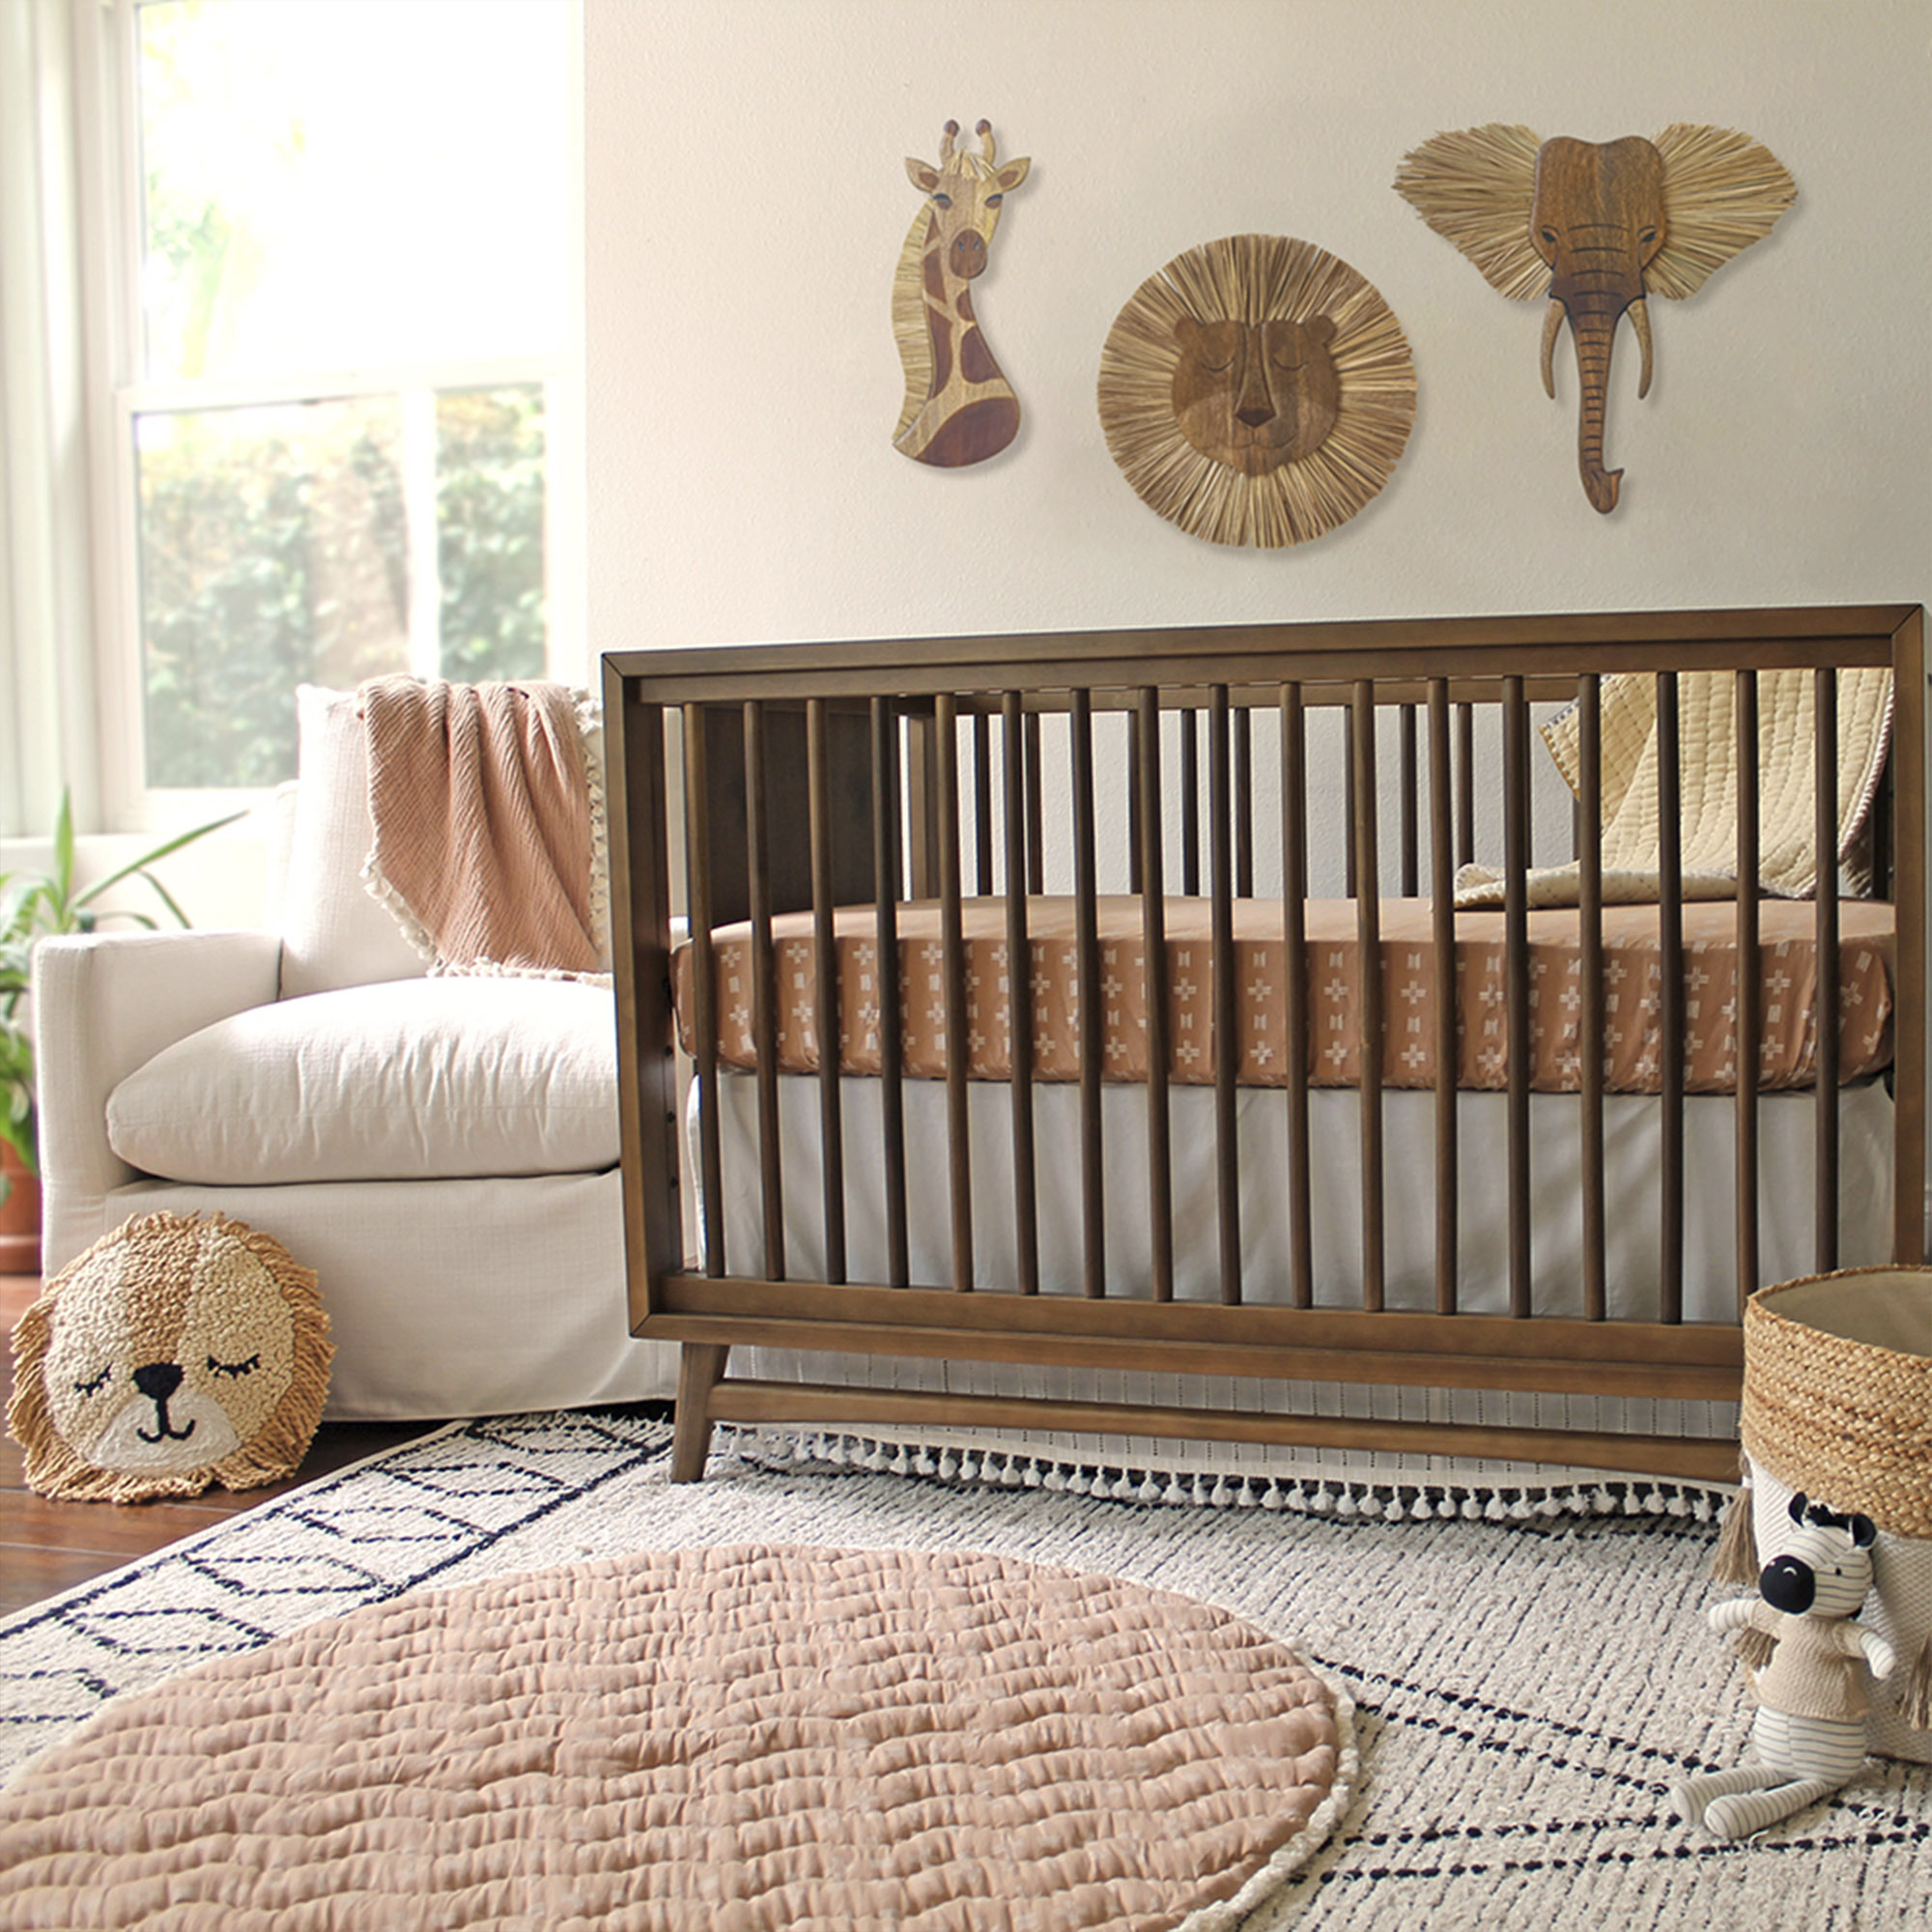 40 Baby Room Ideas for Decorating a Nursery That's Unique